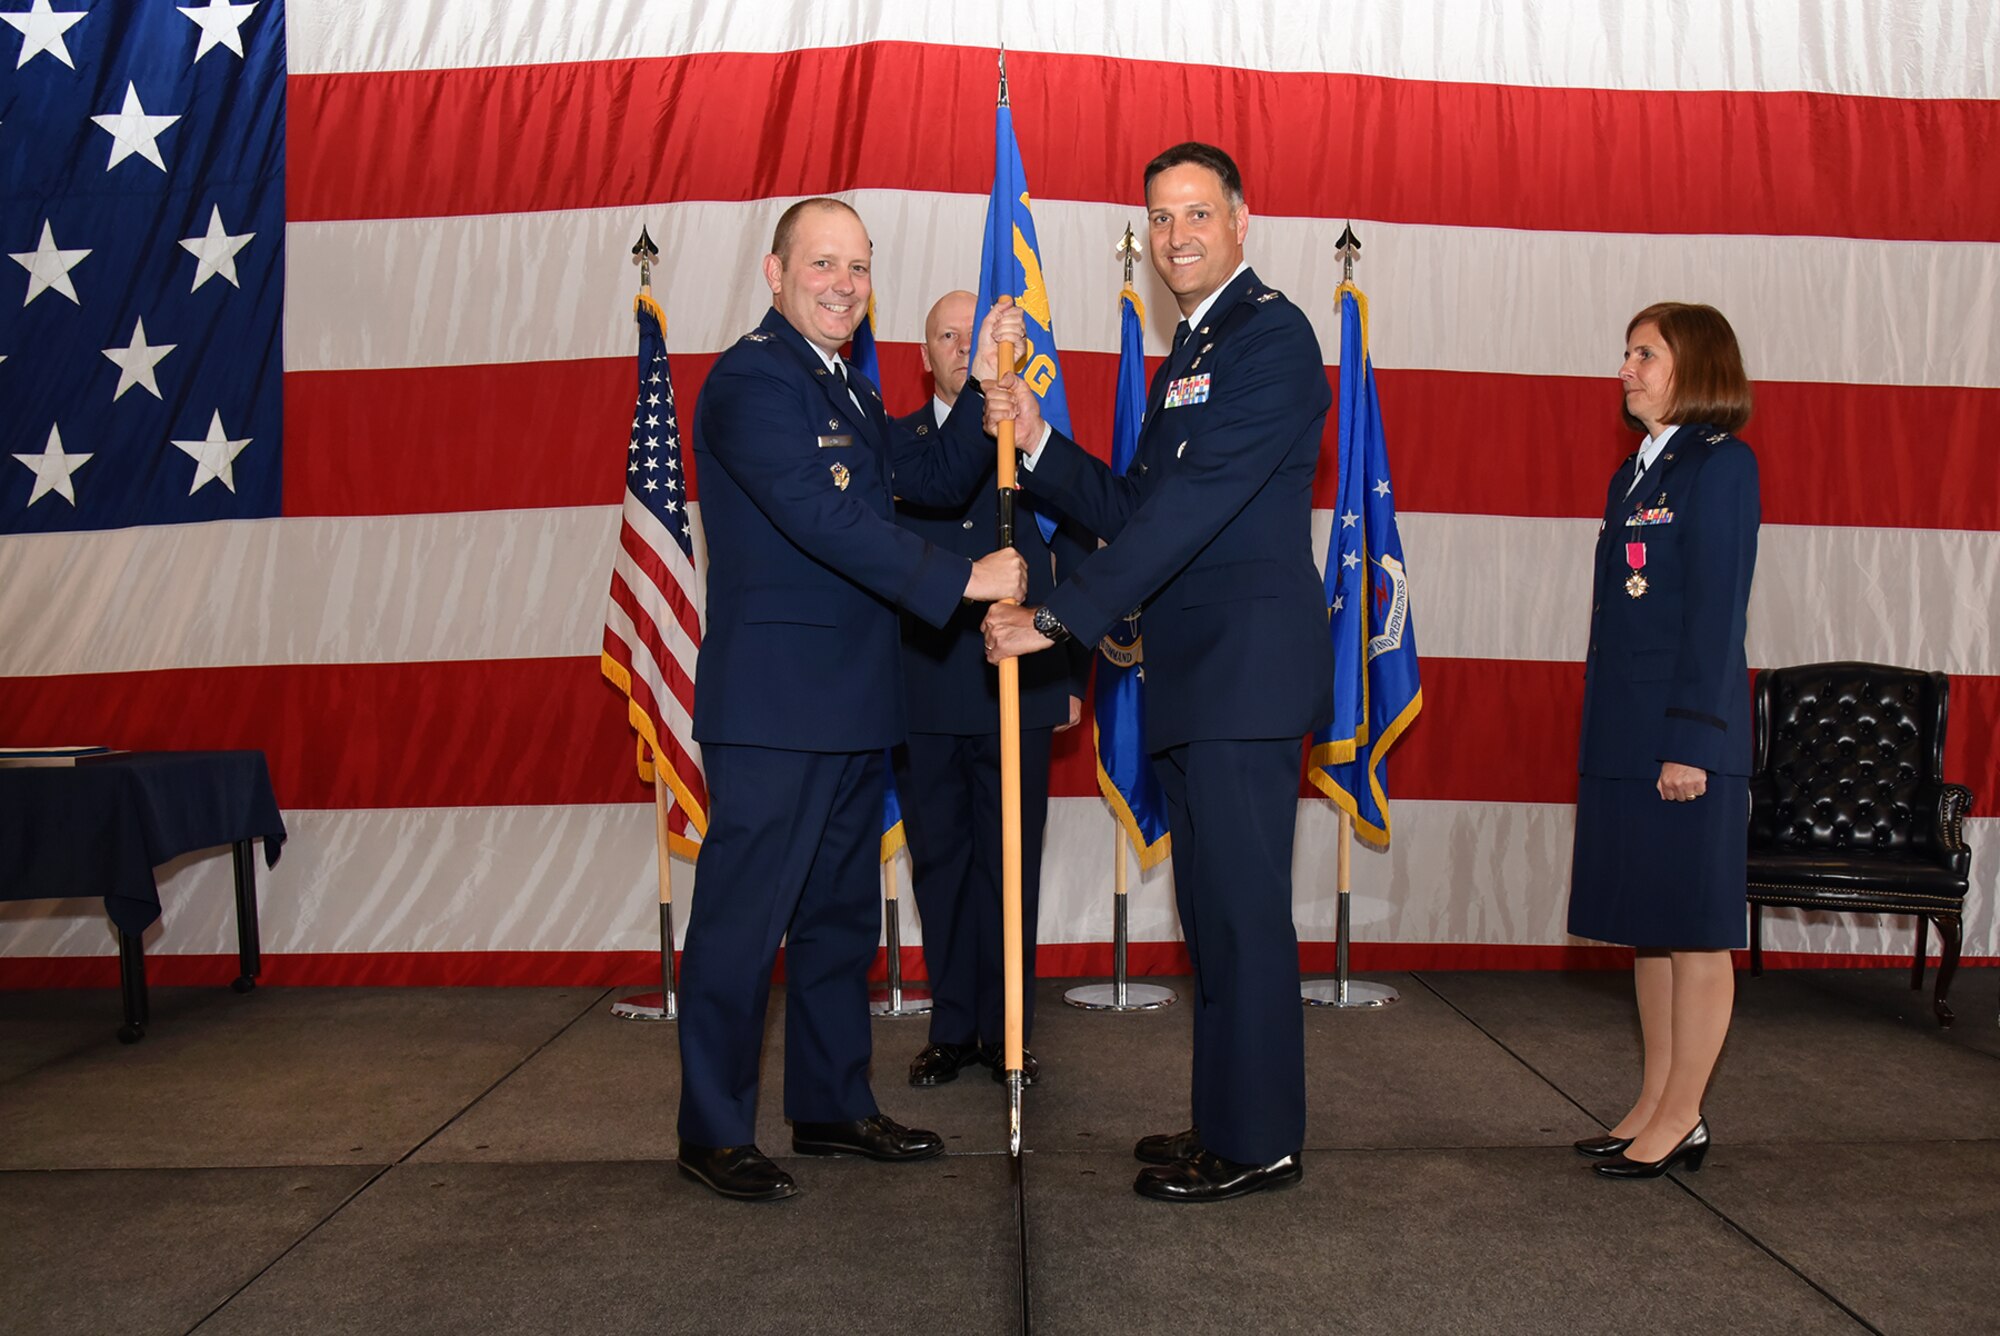 PETERSON AIR FORCE BASE, Colo. – Col. Scot Spann, 21st Medical Group incoming commander, receives the 21st MDG guidon from Col. Doug Schiess, 21st Space Wing commander, at Peterson Air Force Base, Colo., June 24, 2016. The 21st MDG is comprised of more than 550 medical professionals that provide healthcare and mission-readiness support for more than 26,000 active duty, retired and Department of Defense beneficiaries of the 21st SW, 50th SW, Colorado Springs community and 59 geographically separated units around the globe. (U.S. Air Force photo by Airman 1st Class Dennis Hoffman)